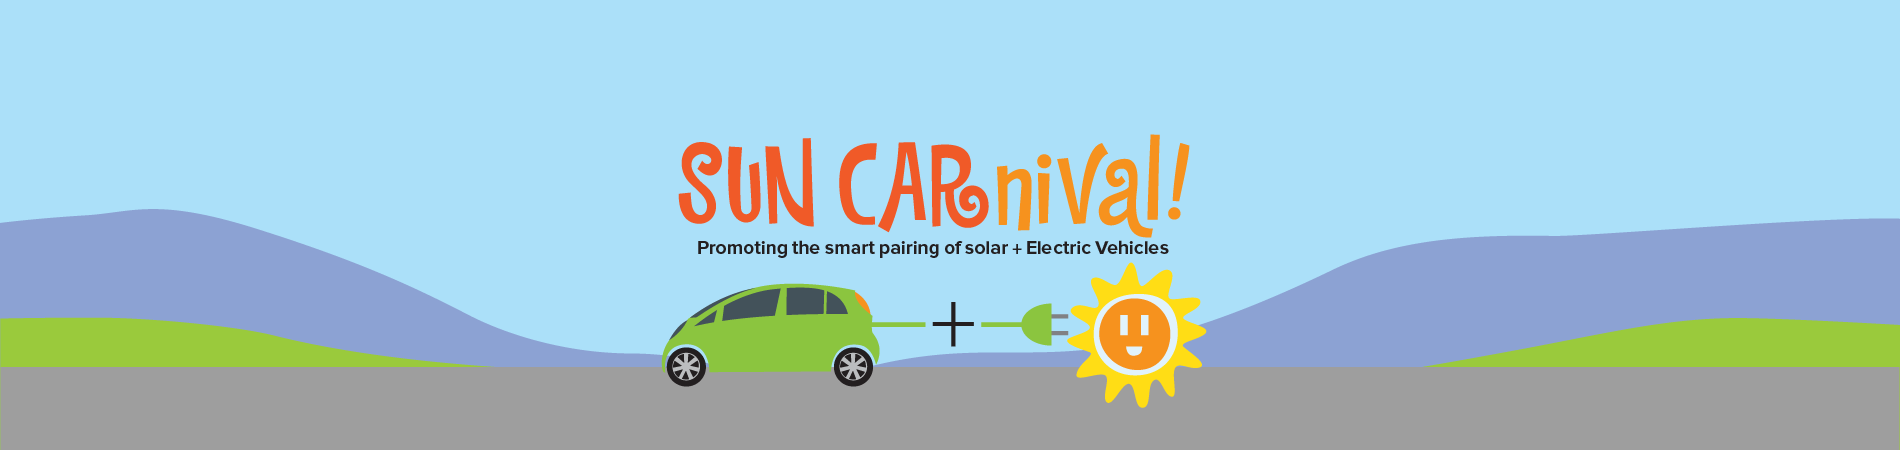 Sun Carnival Image of Electric Vehicle for Event that emphasizes the smart pairing between solar and electric cars